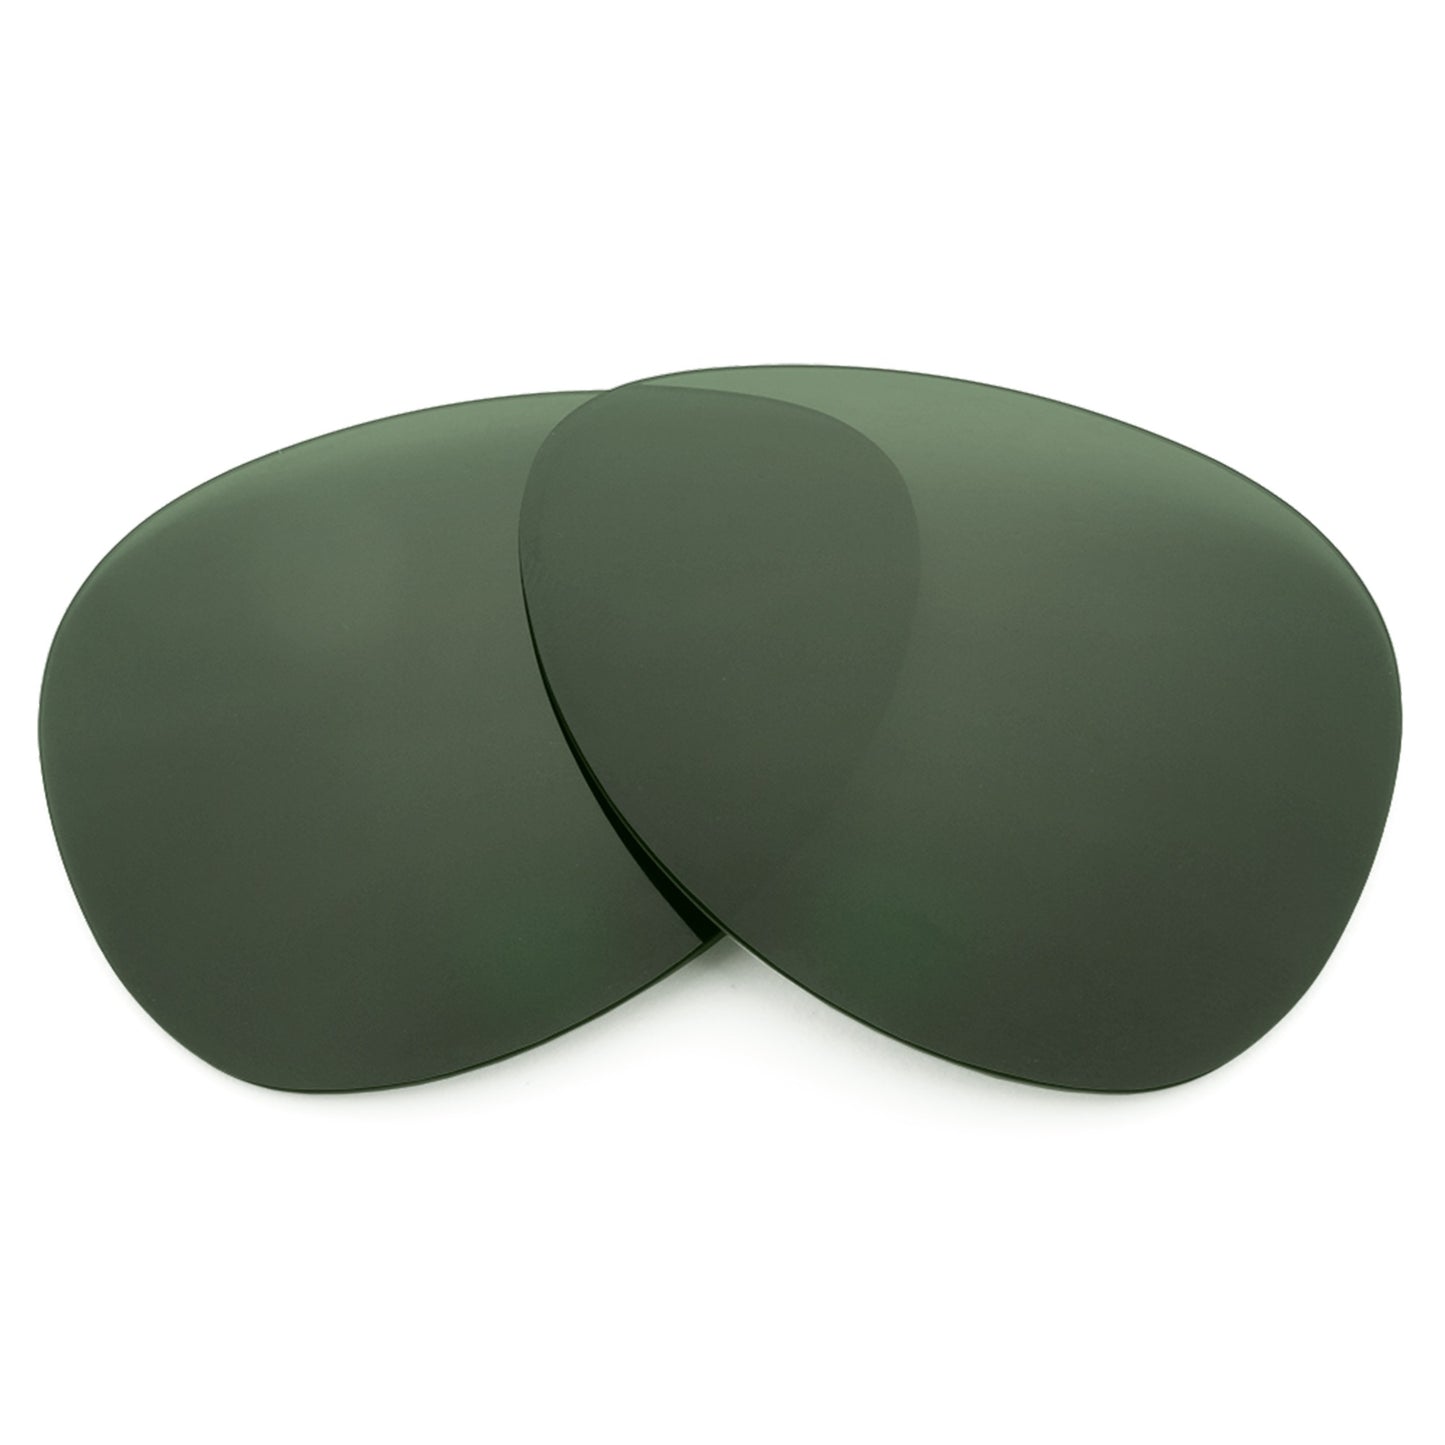 Revant replacement lenses for Ray-Ban RB3533 57mm Non-Polarized Gray Green